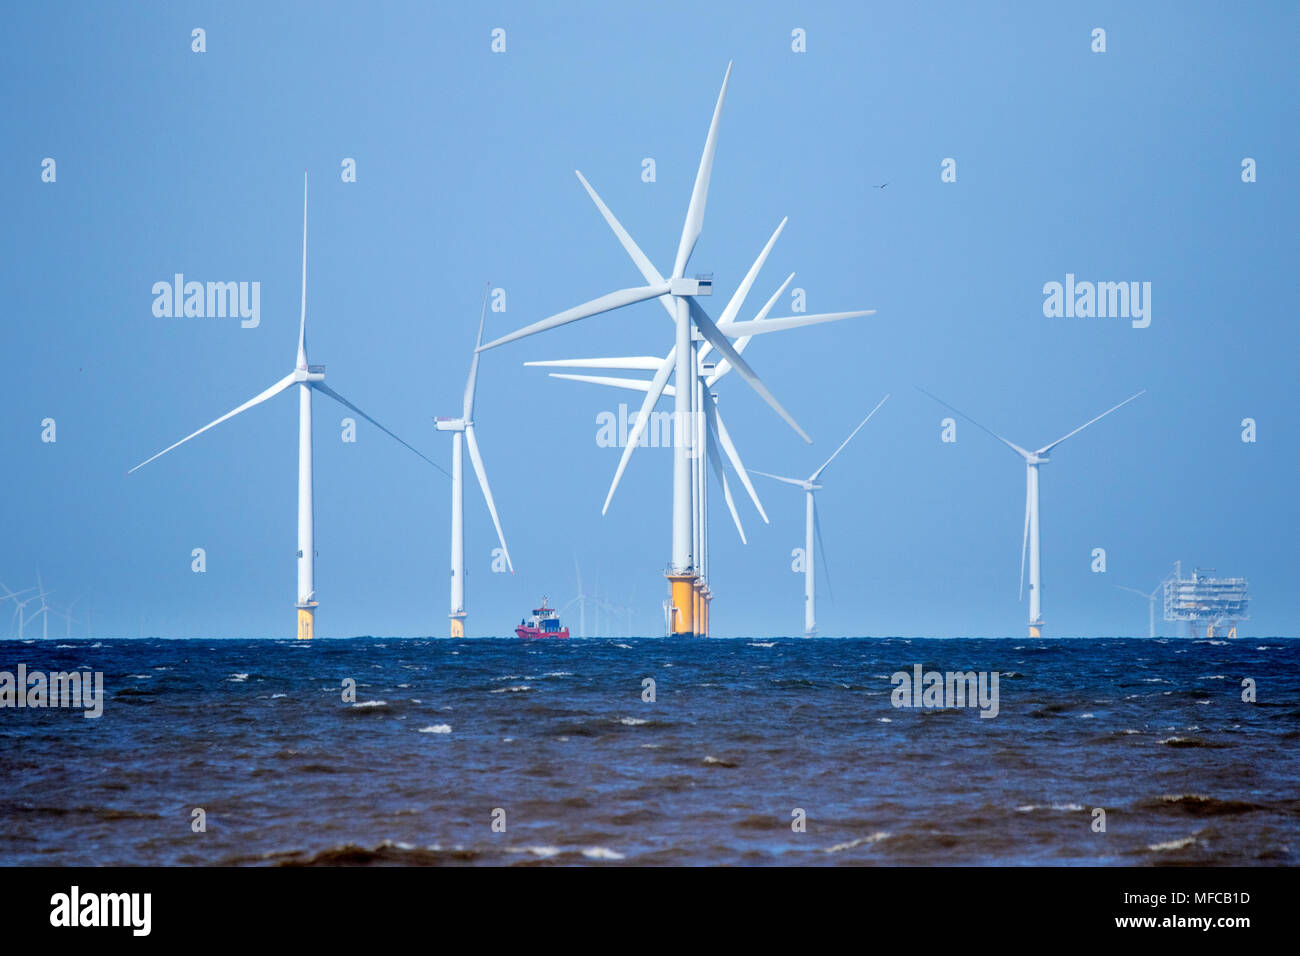 The offshore wind turbines producing electricity from wind power at the Burbo Bank wind farm off the Crosby coastline in Liverpool, Merseyside. Stock Photo